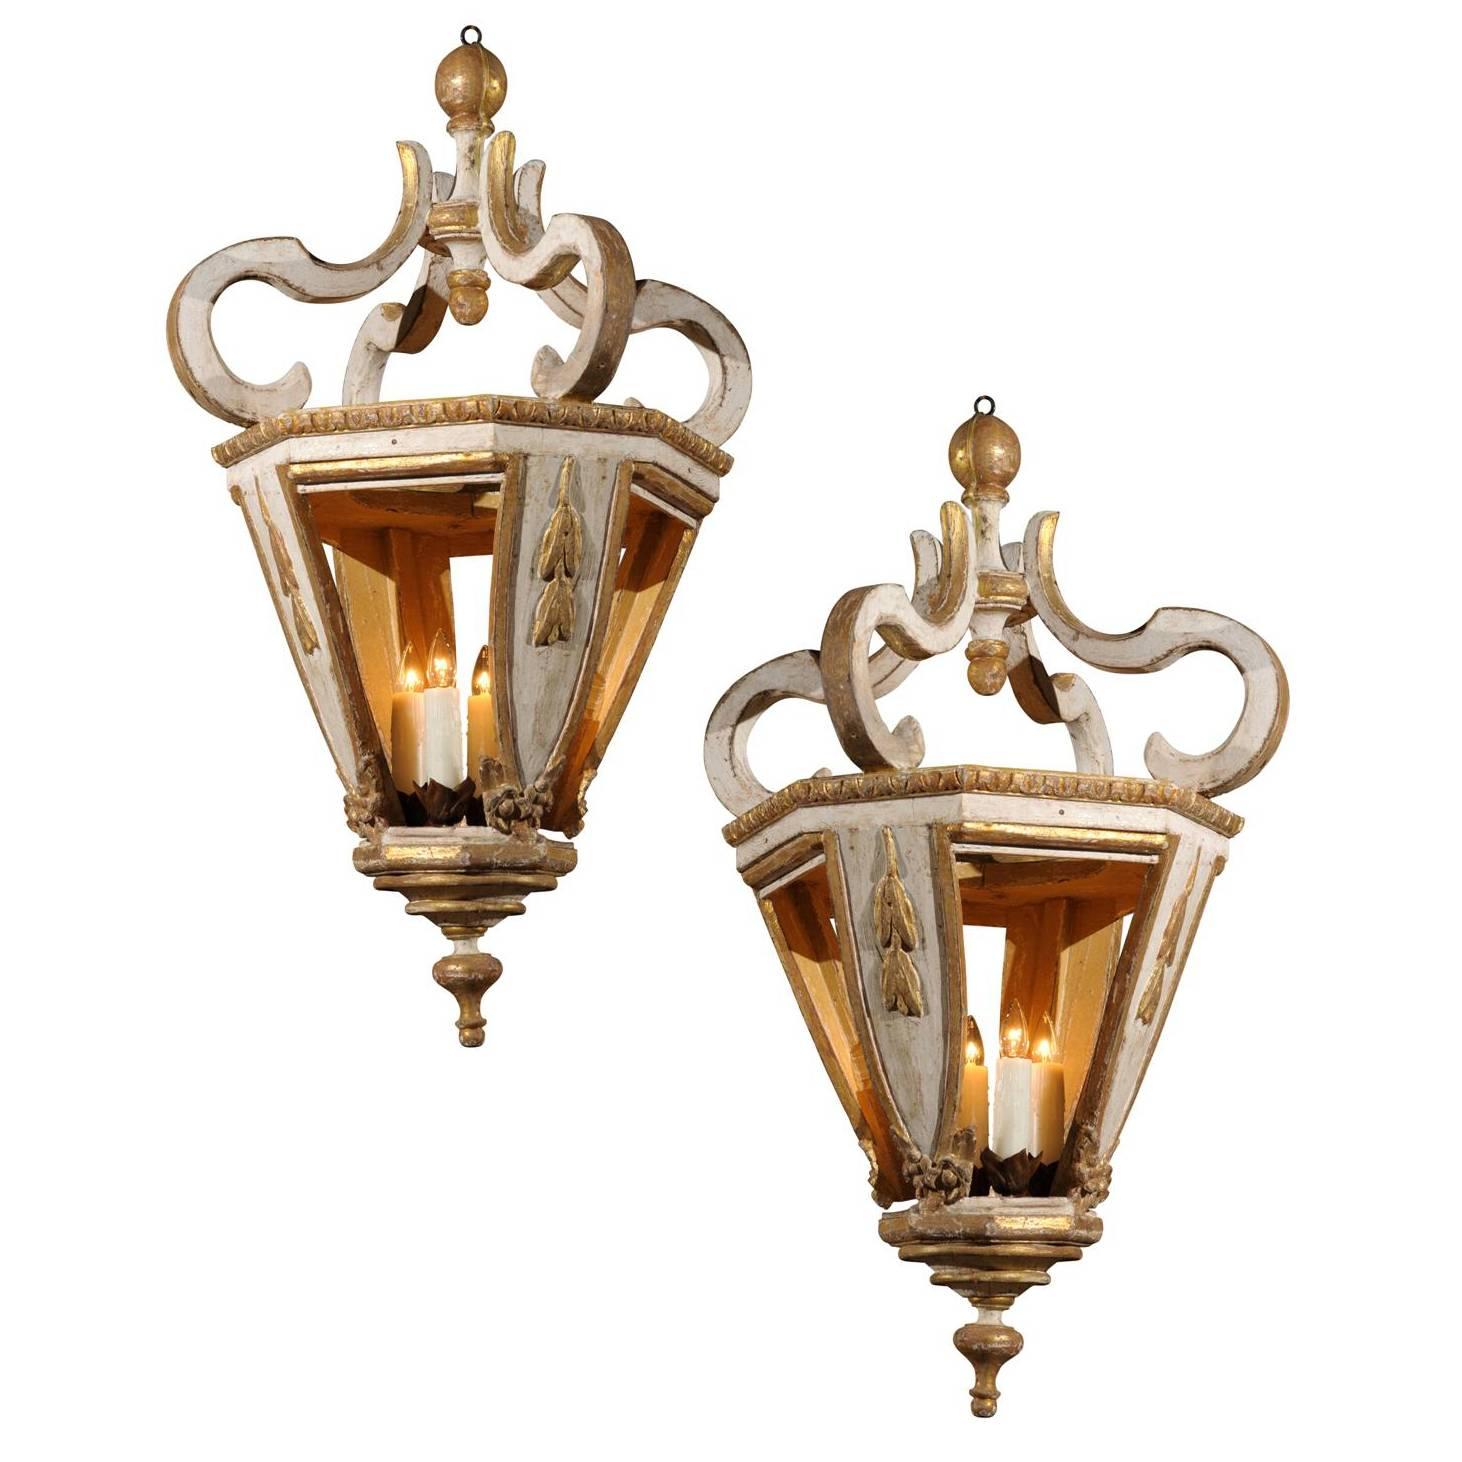  Italian Baroque Style 19th Century White and Gold Hanging Lanterns For Sale